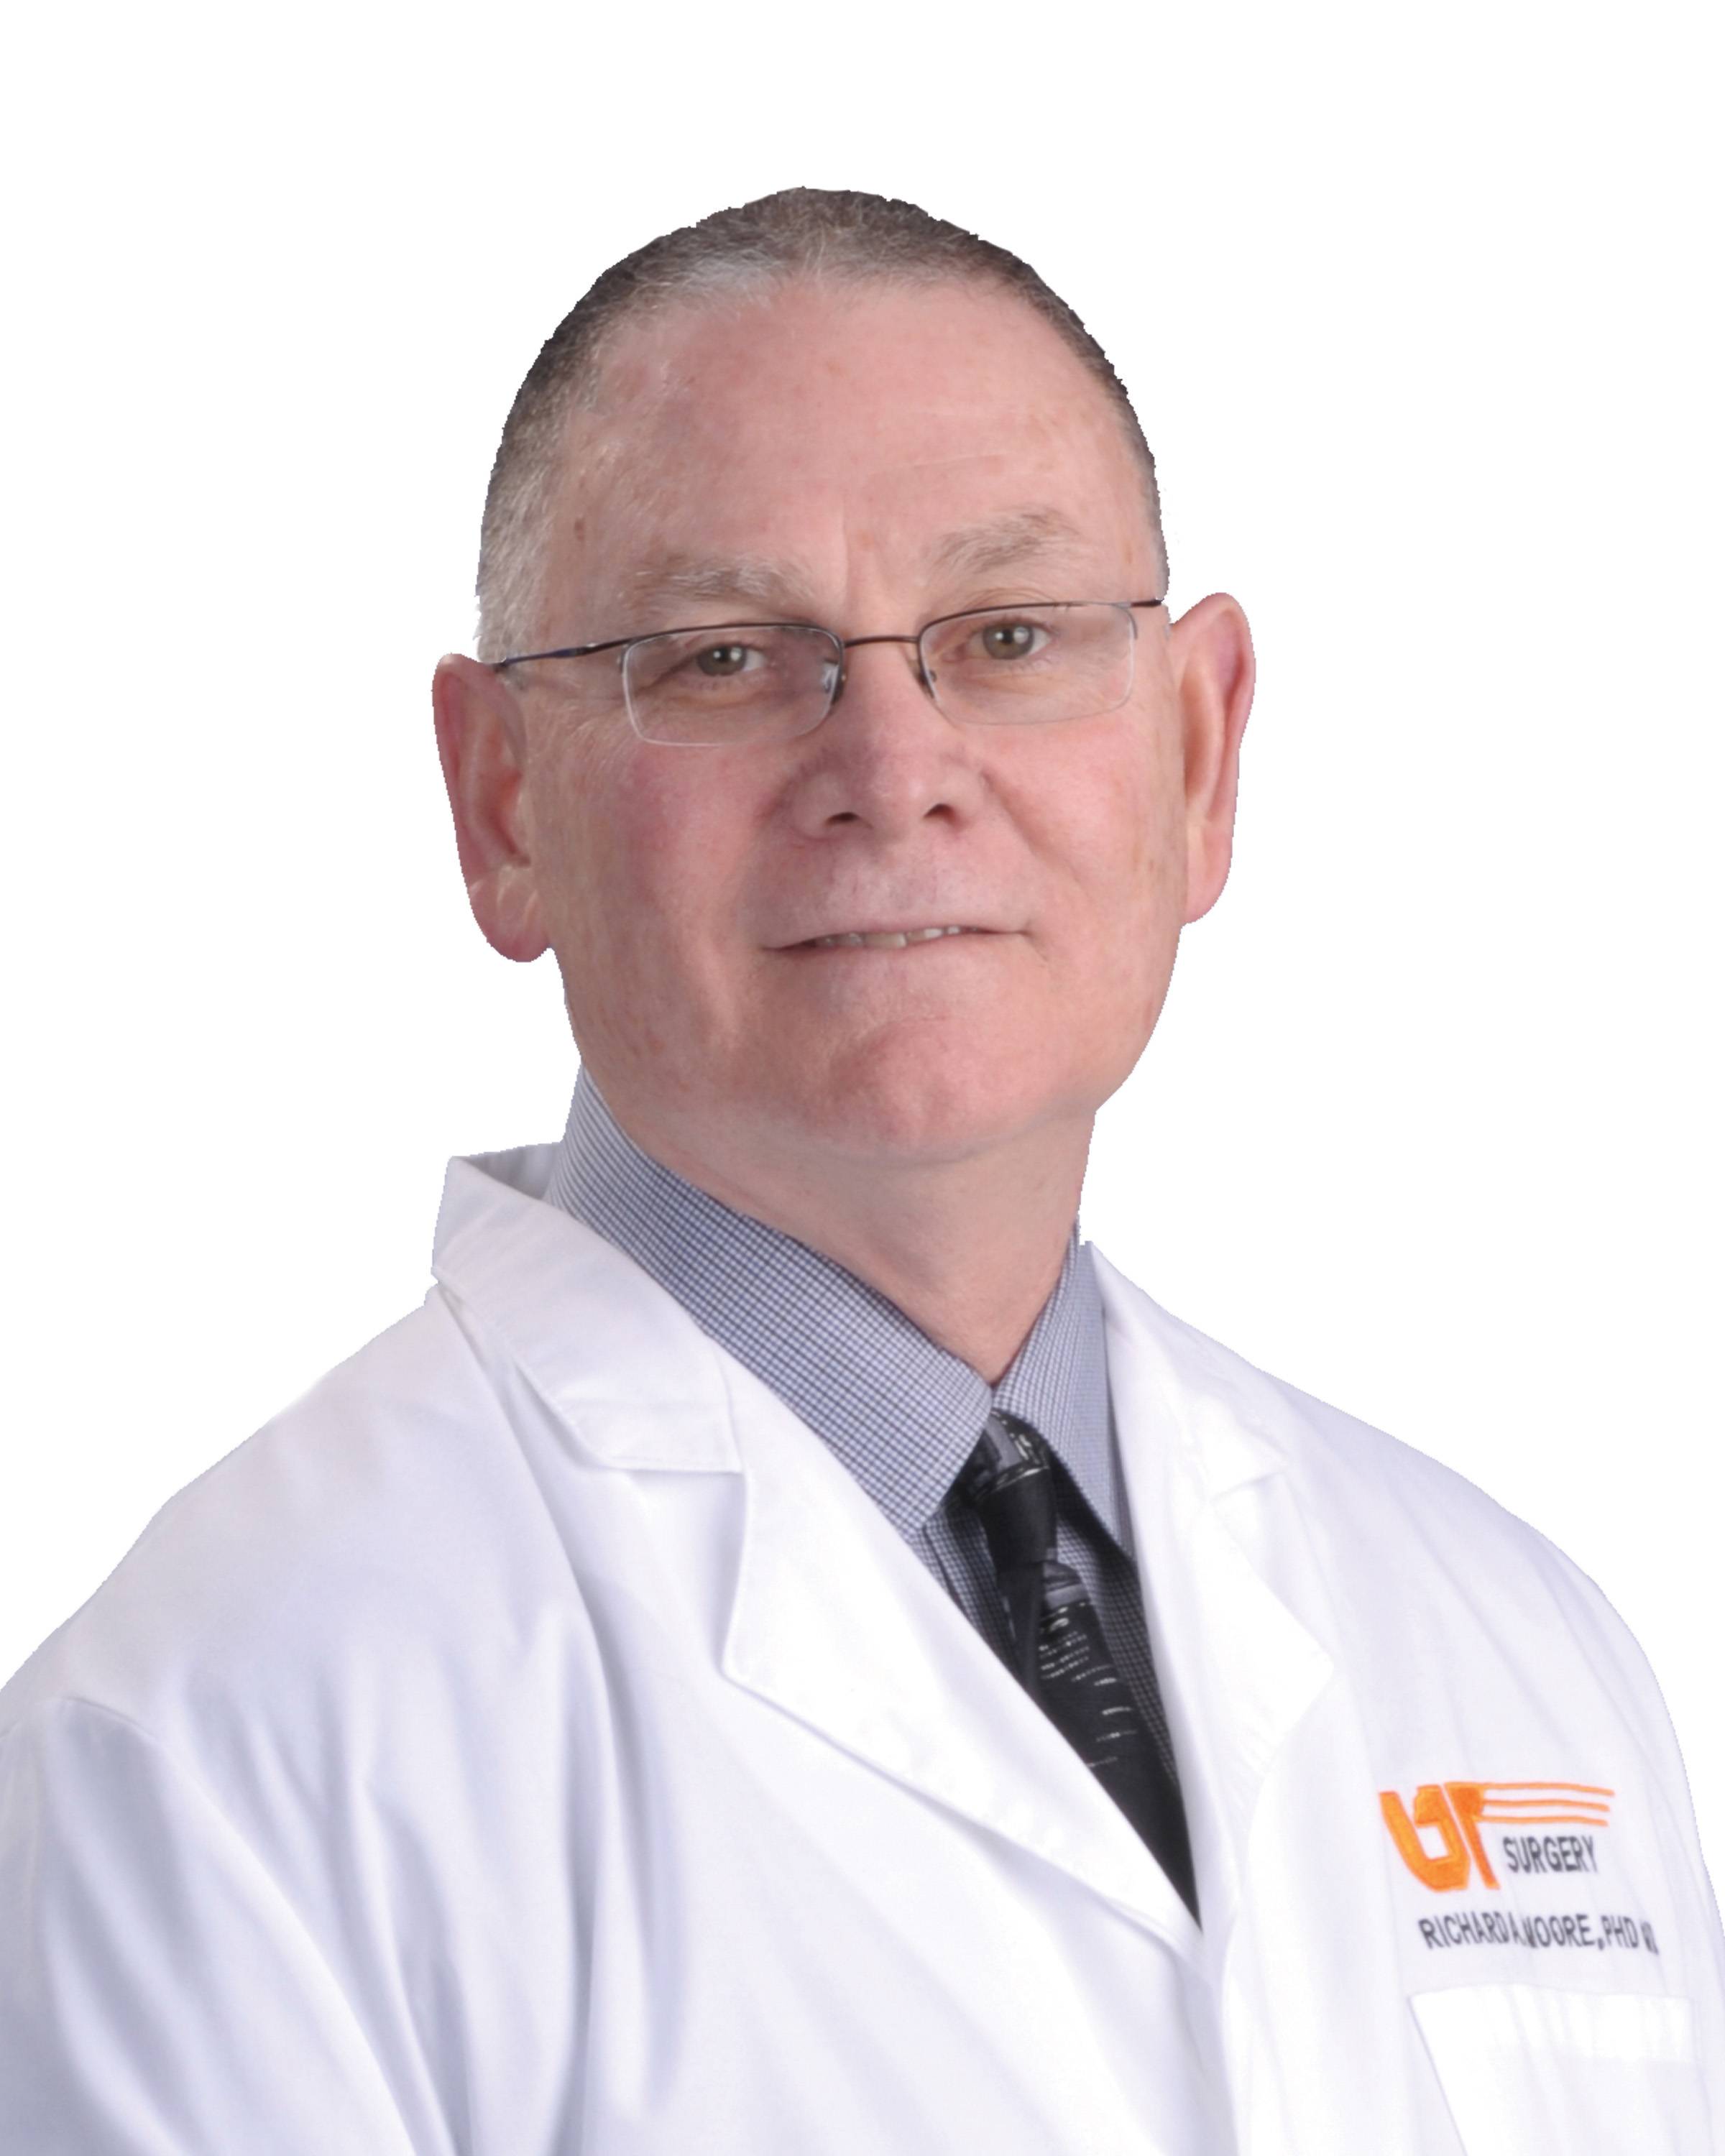 Richard Moore, MD, PhD, FACS, FACRS, Associate Program Director, Surgery Residency and Colon and Rectal Surgery Fellowship